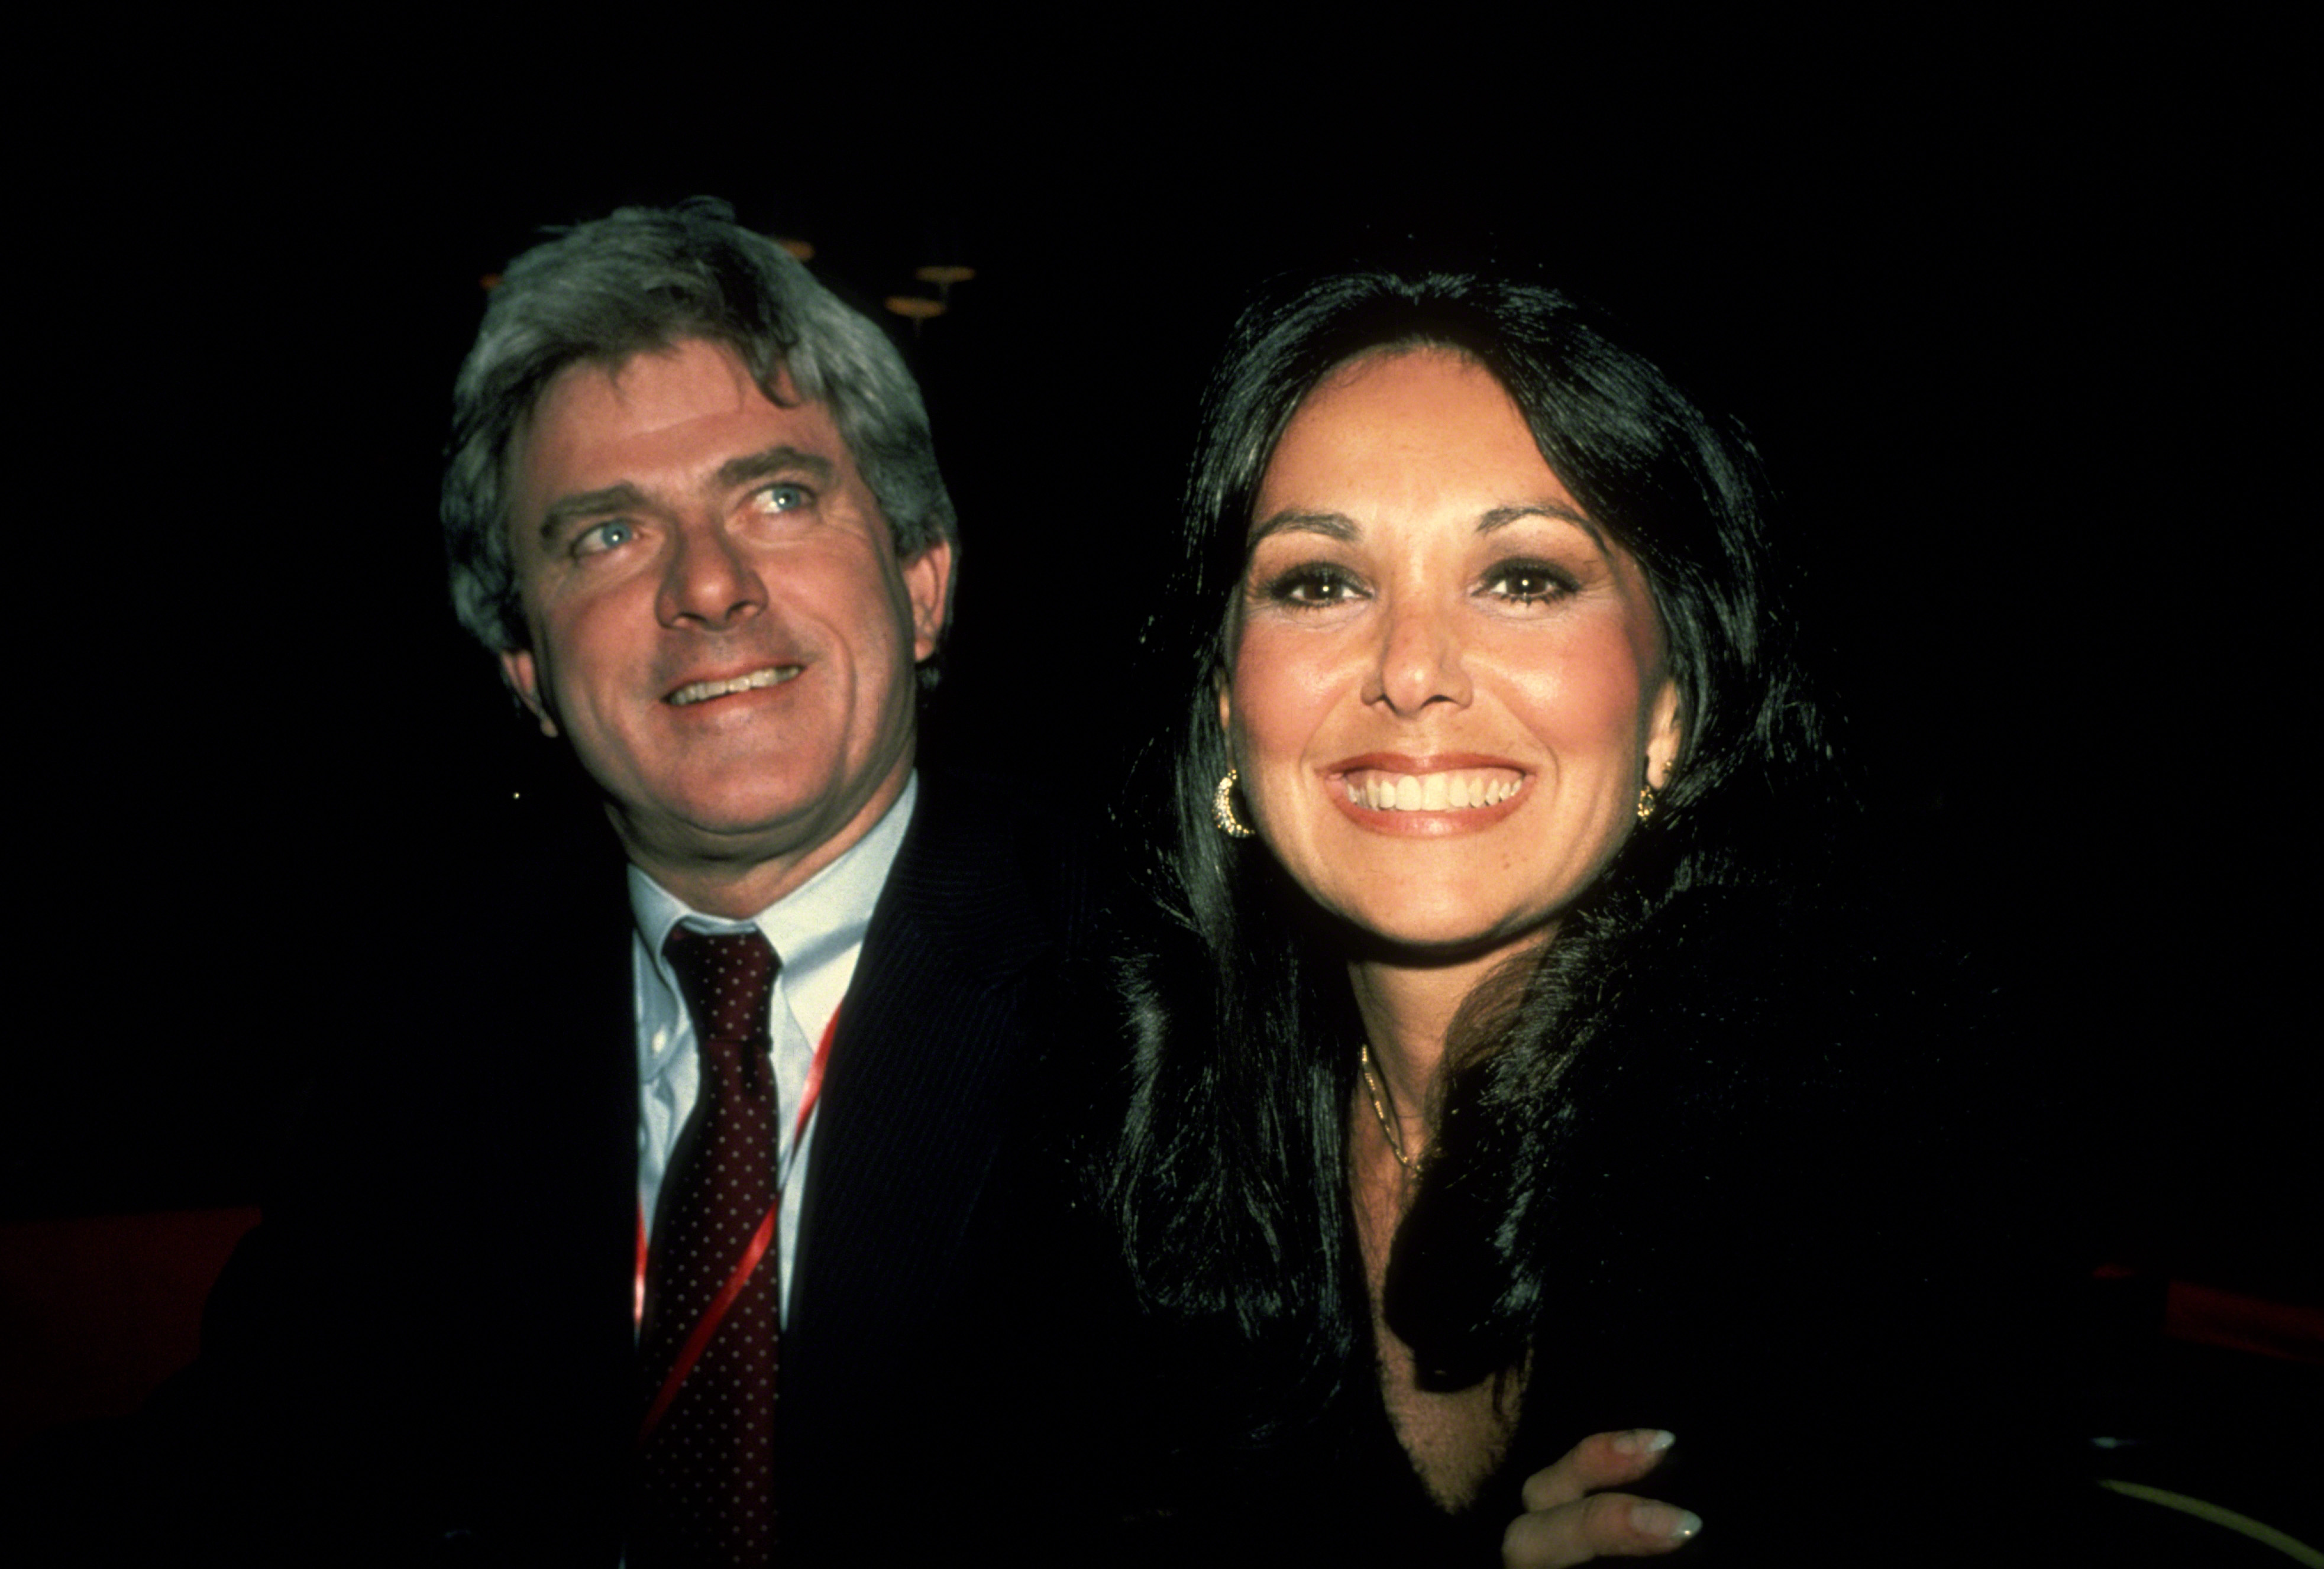 Phil Donahue and Marlo Thomas, circa 1979, in New York City | Source: Getty Images